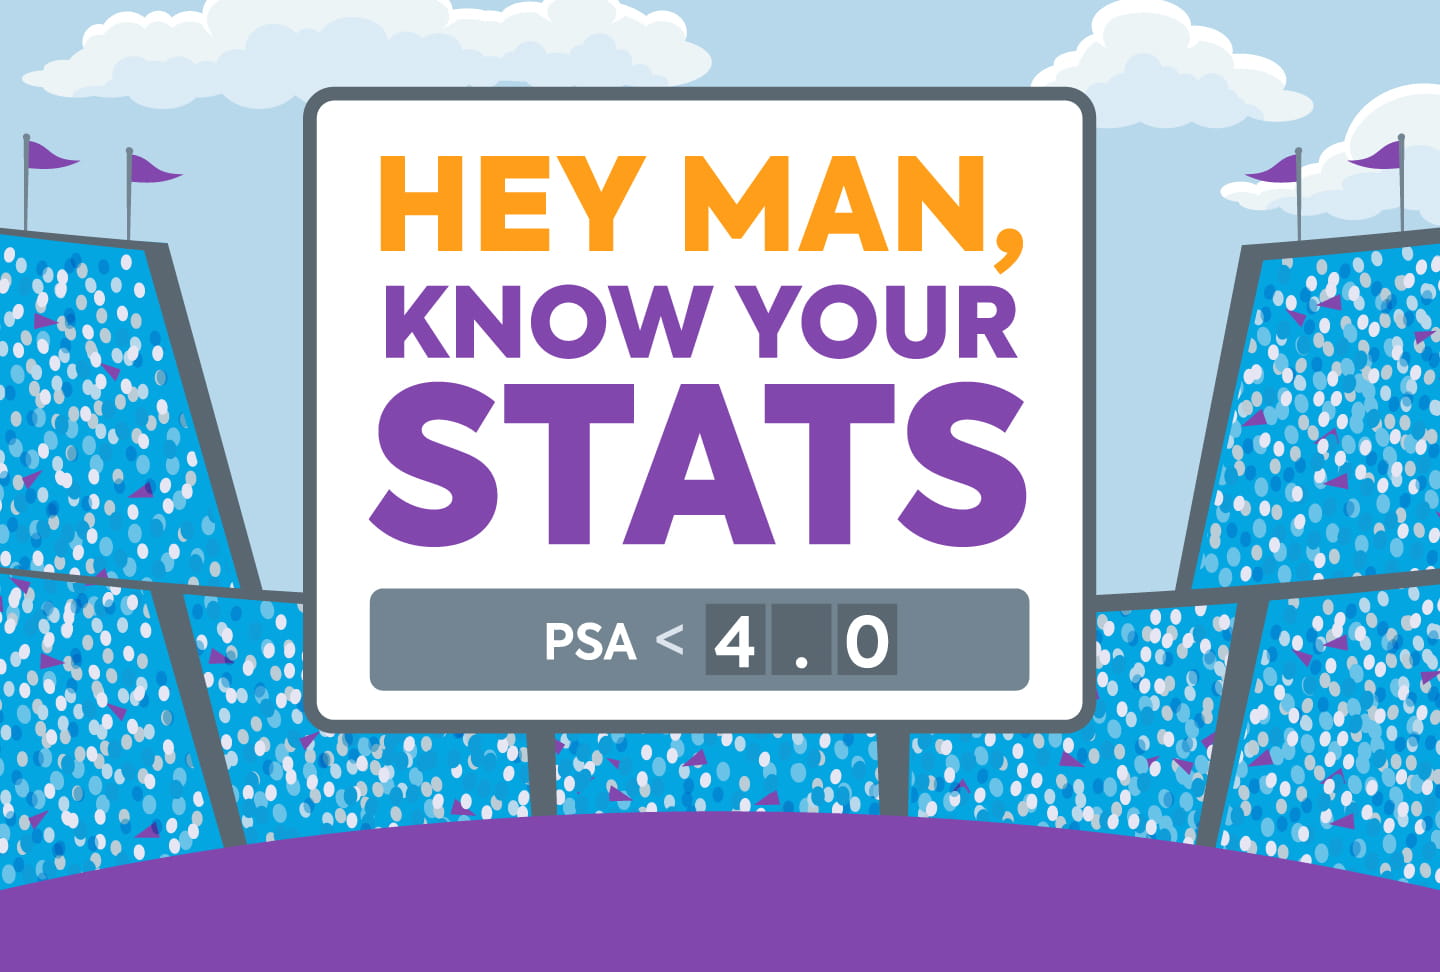 Illustration of scoreboard in stadium. Text reads "Hey man, know your stats, PSA < 4.0"